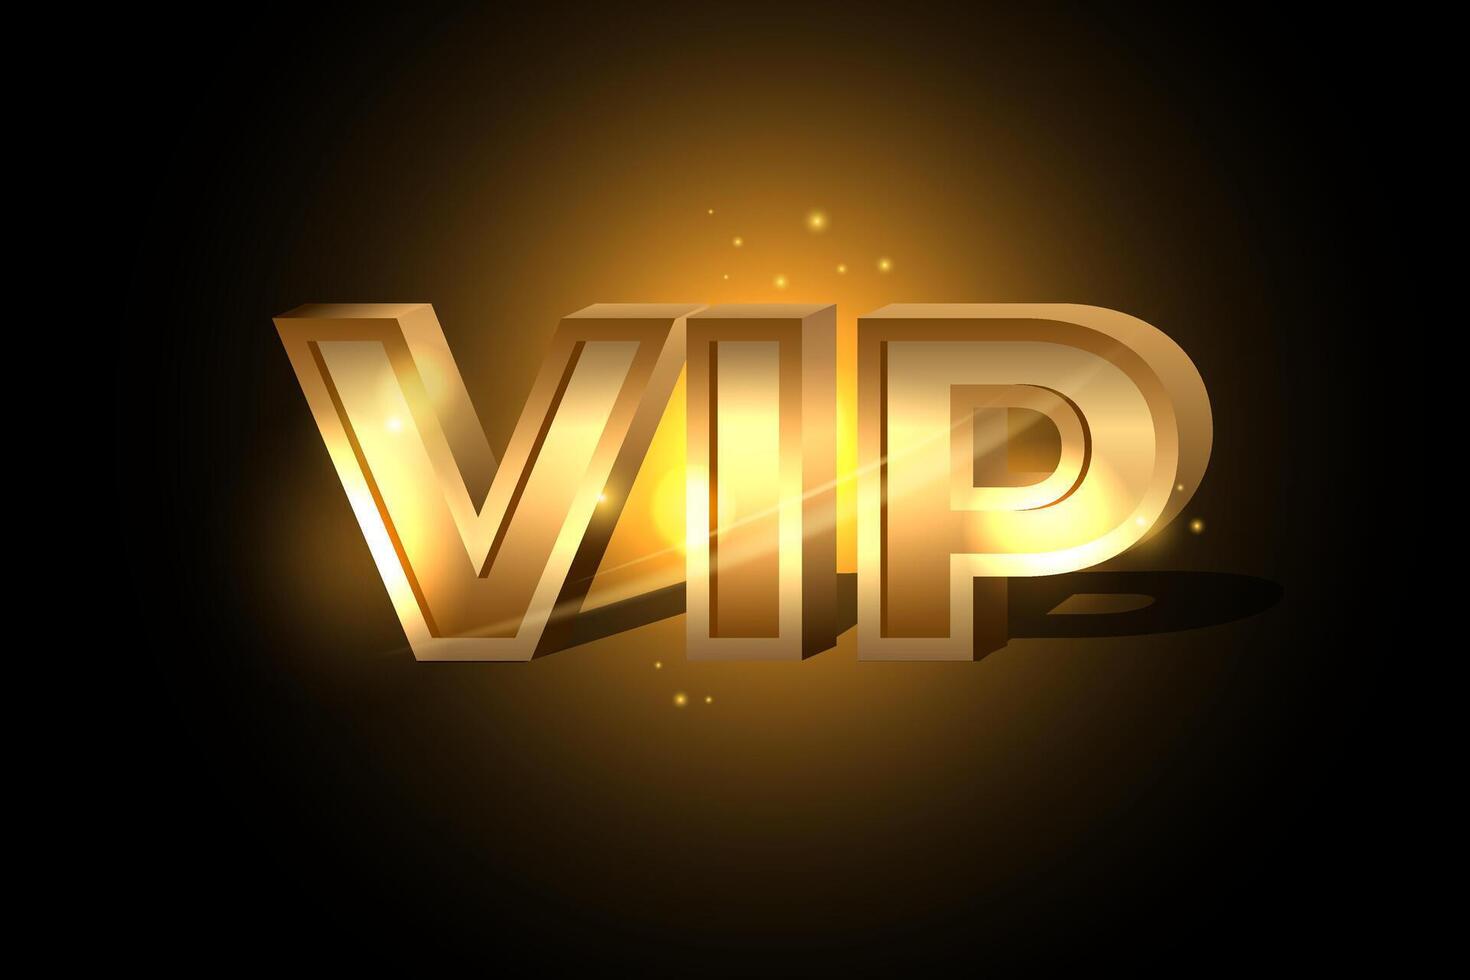 Luxury golden VIP text. Shiny very important person 3D inscription. Glittering gold premium VIP card. Glowing sign of exclusivity vector